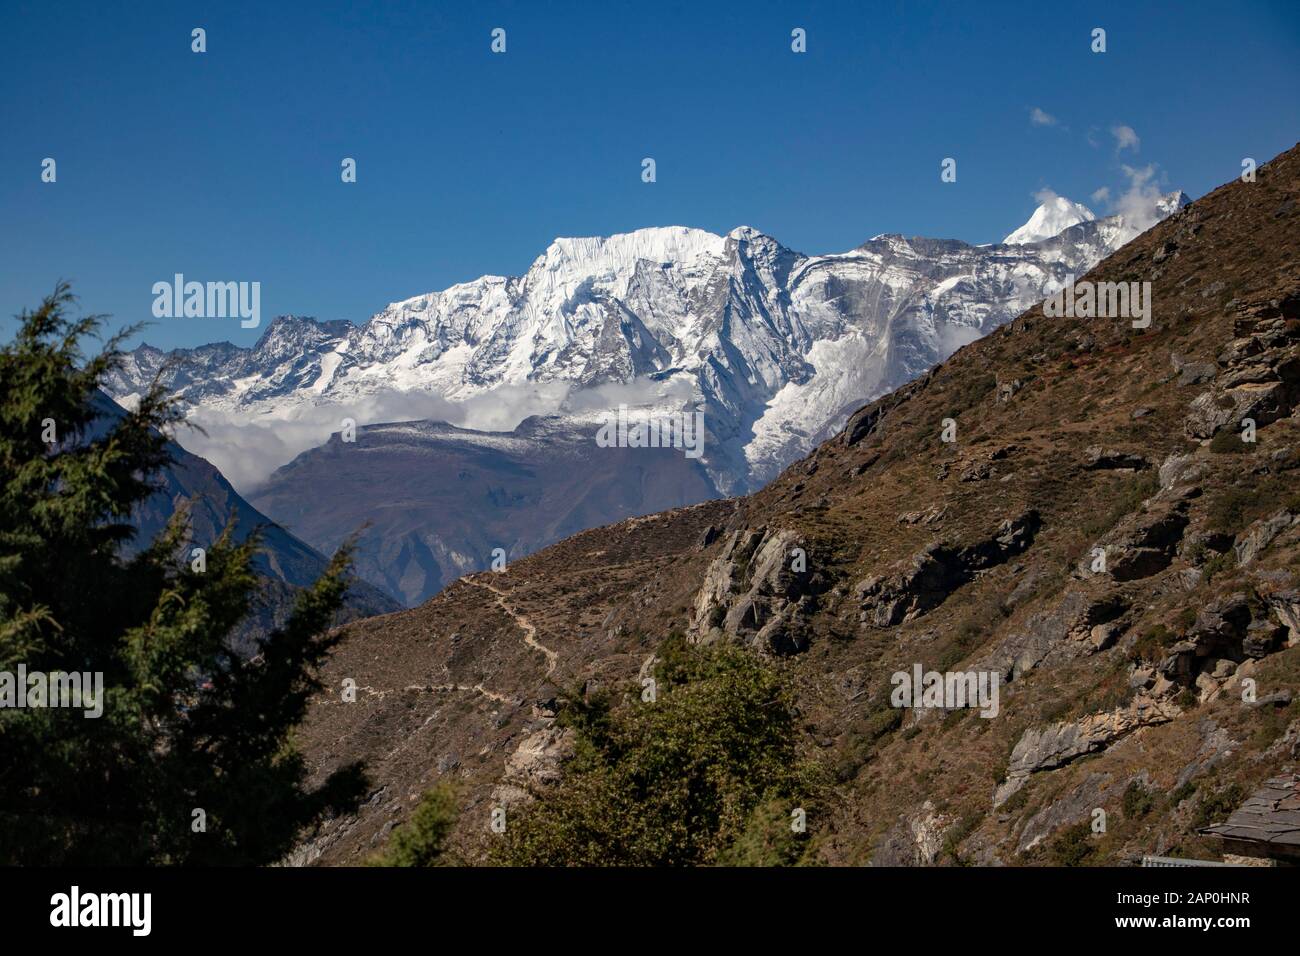 Tree, valley and mountain range in the Himalayan area in Nepal Stock Photo